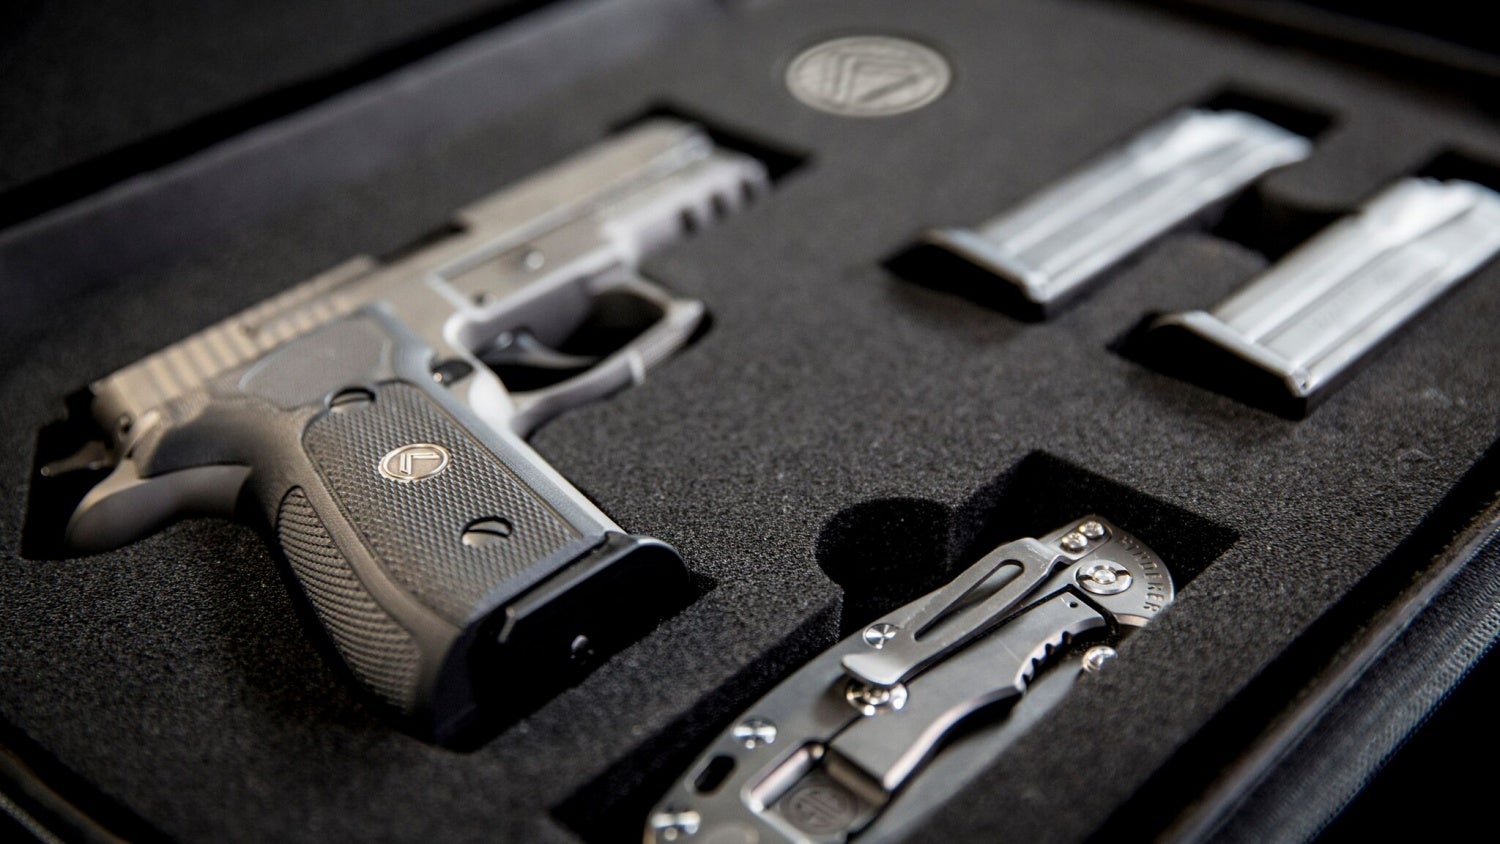 The new SIG Legion P-229 in it's hard case with three mags, challenge coin and folder knife.